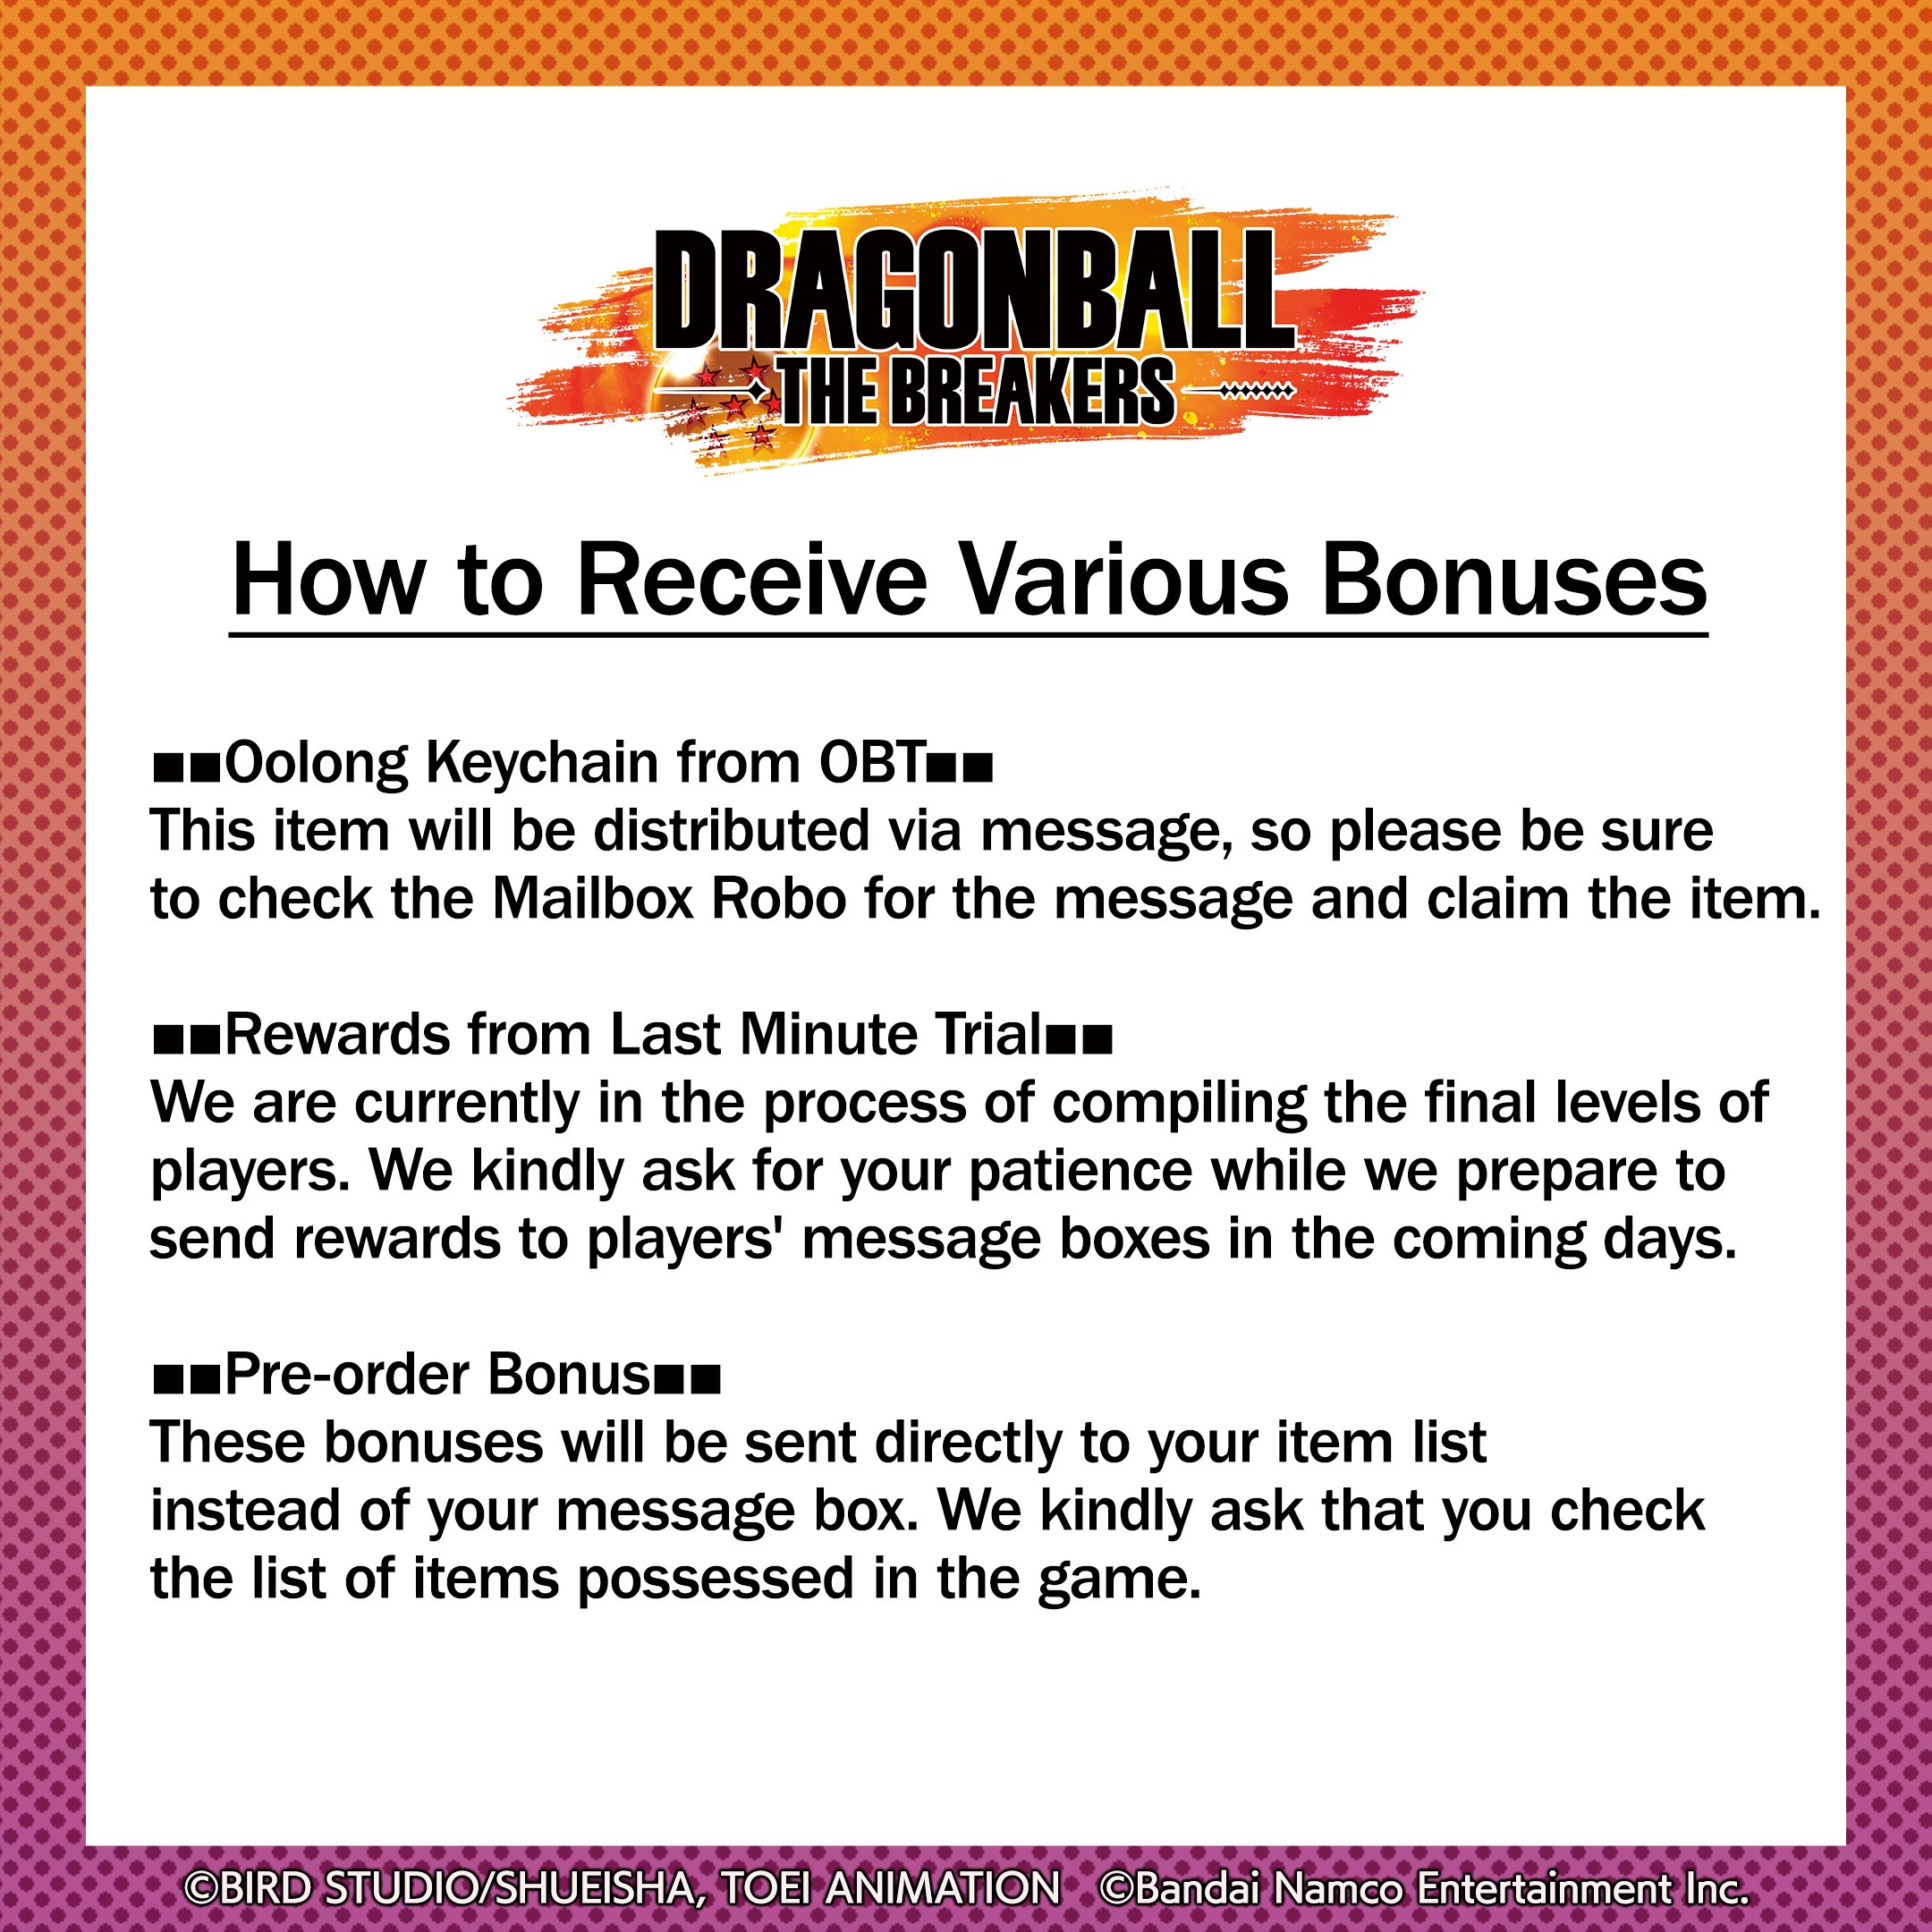 DRAGON BALL: THE BREAKERS - Free Codes